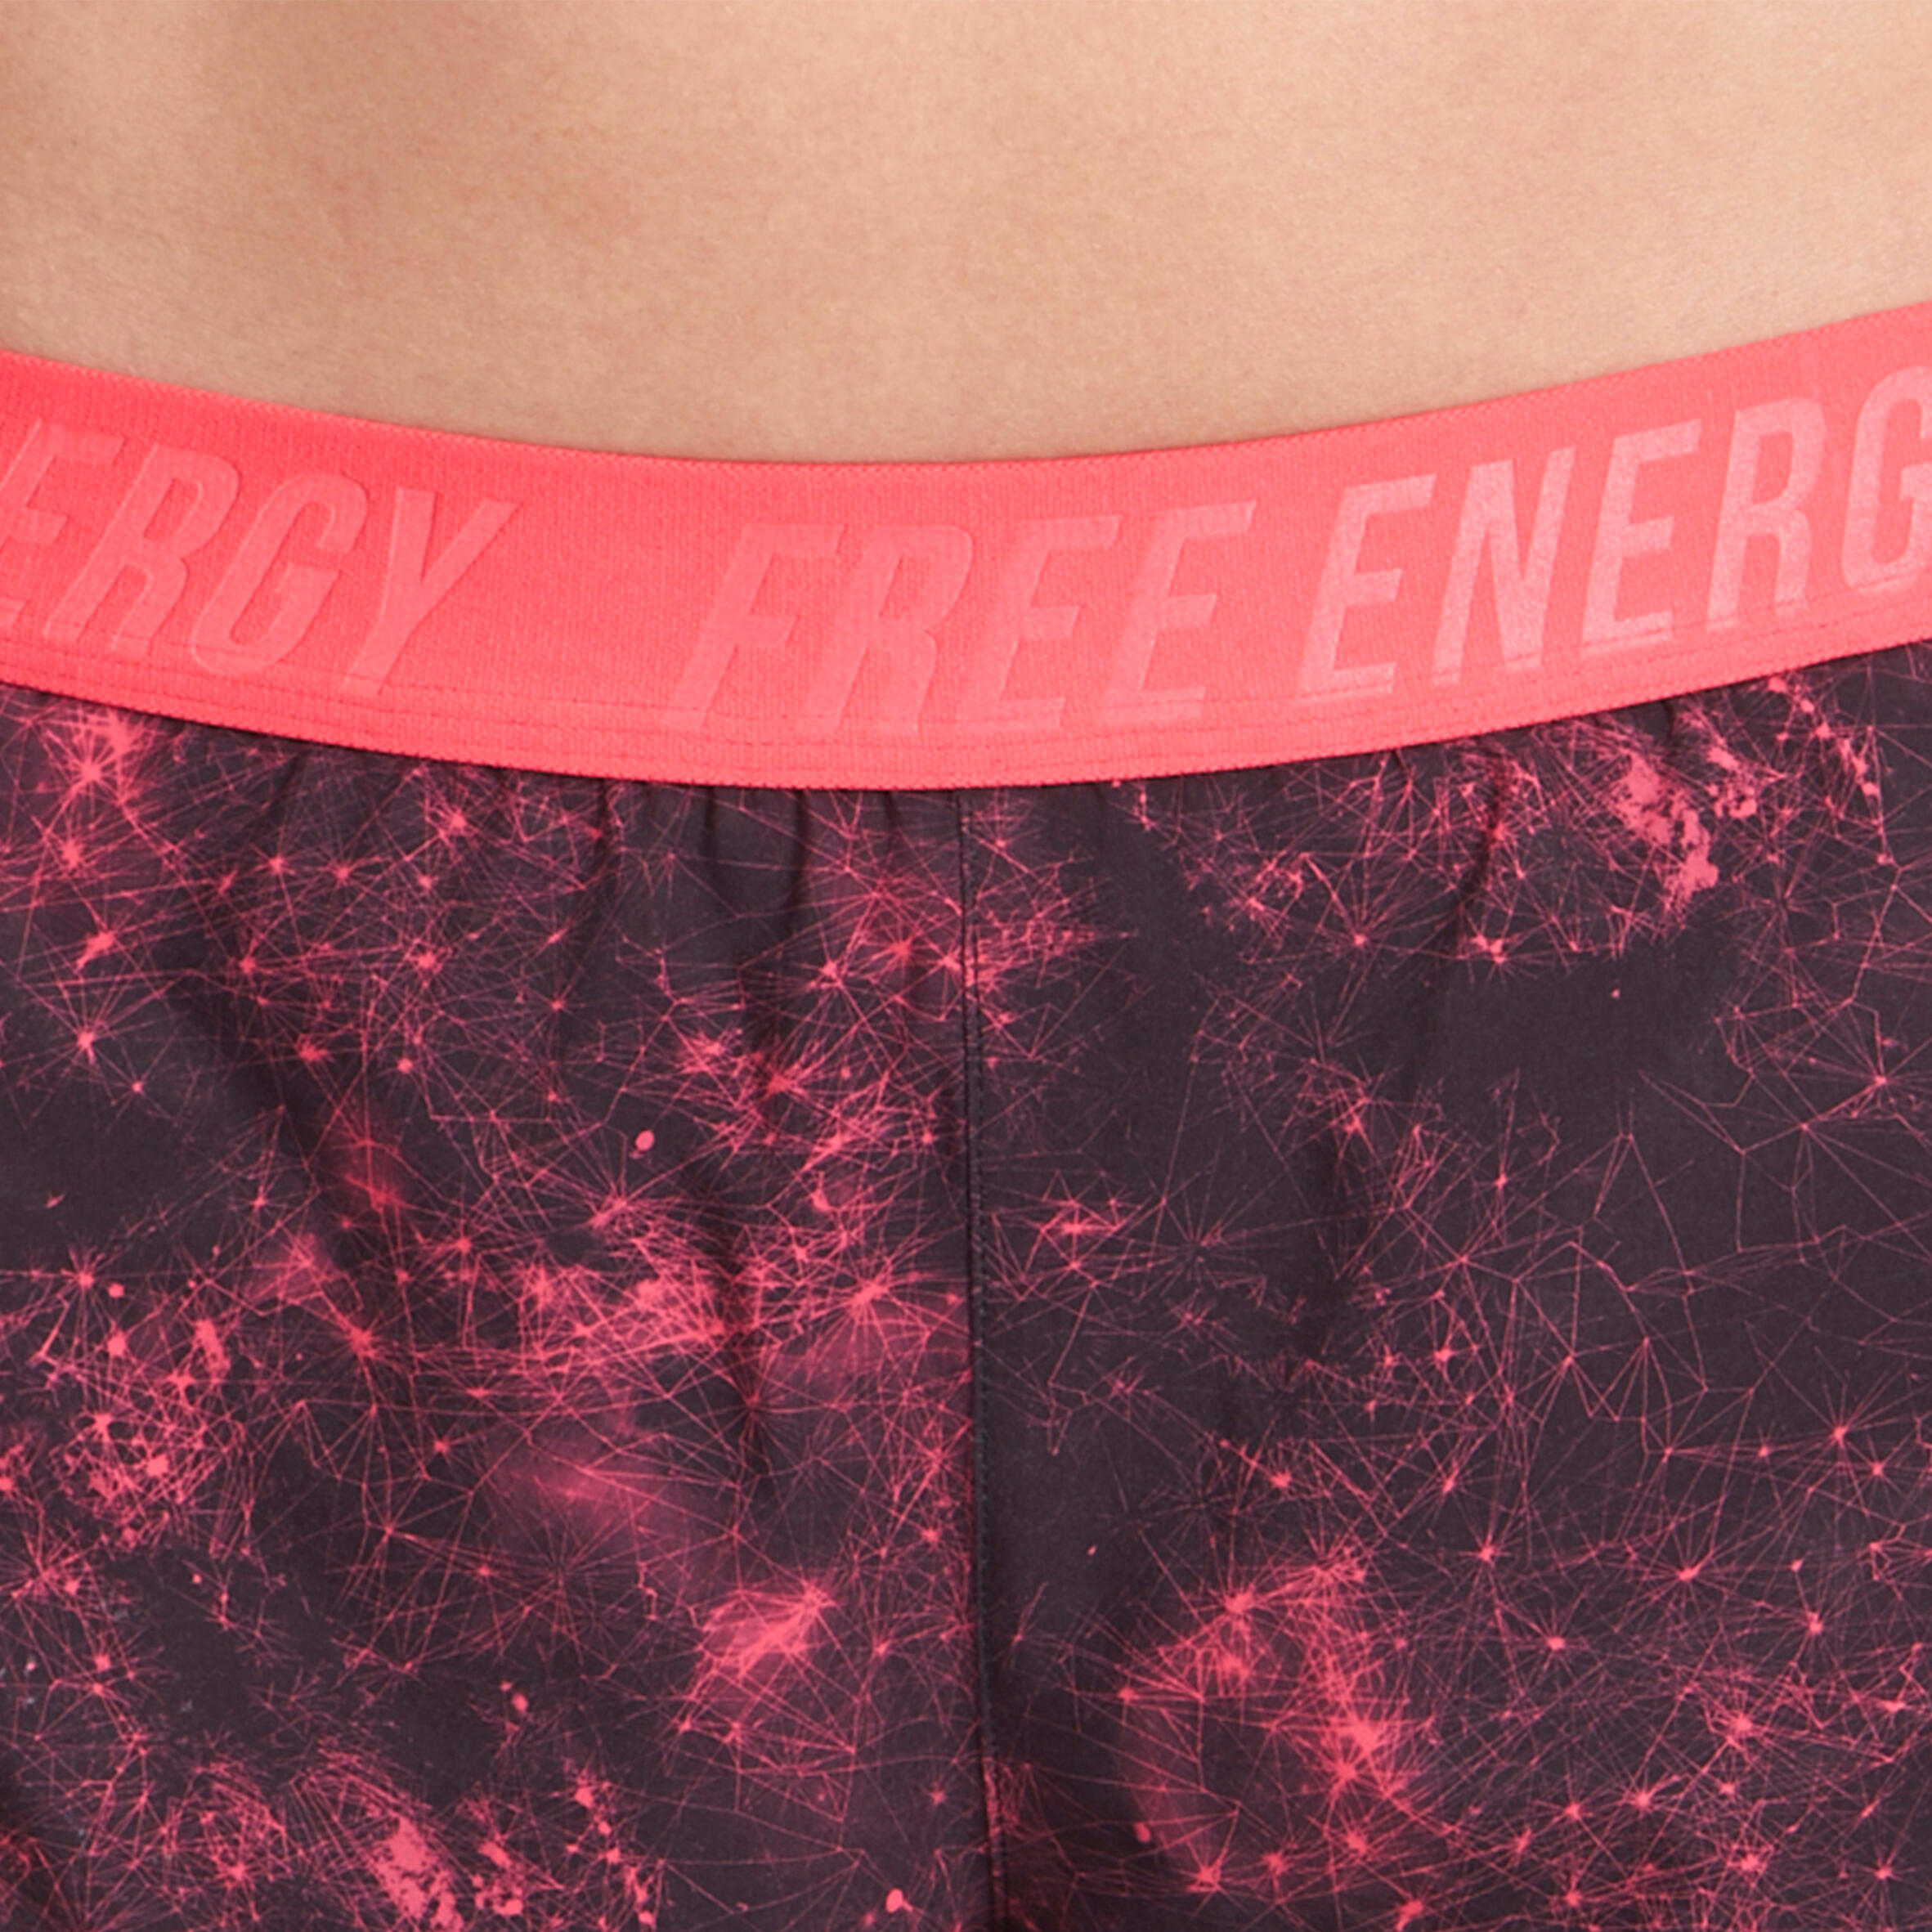 Energy Xtreme Women's 2-in-1 Fitness Shorts - Black/Pink Print 6/14